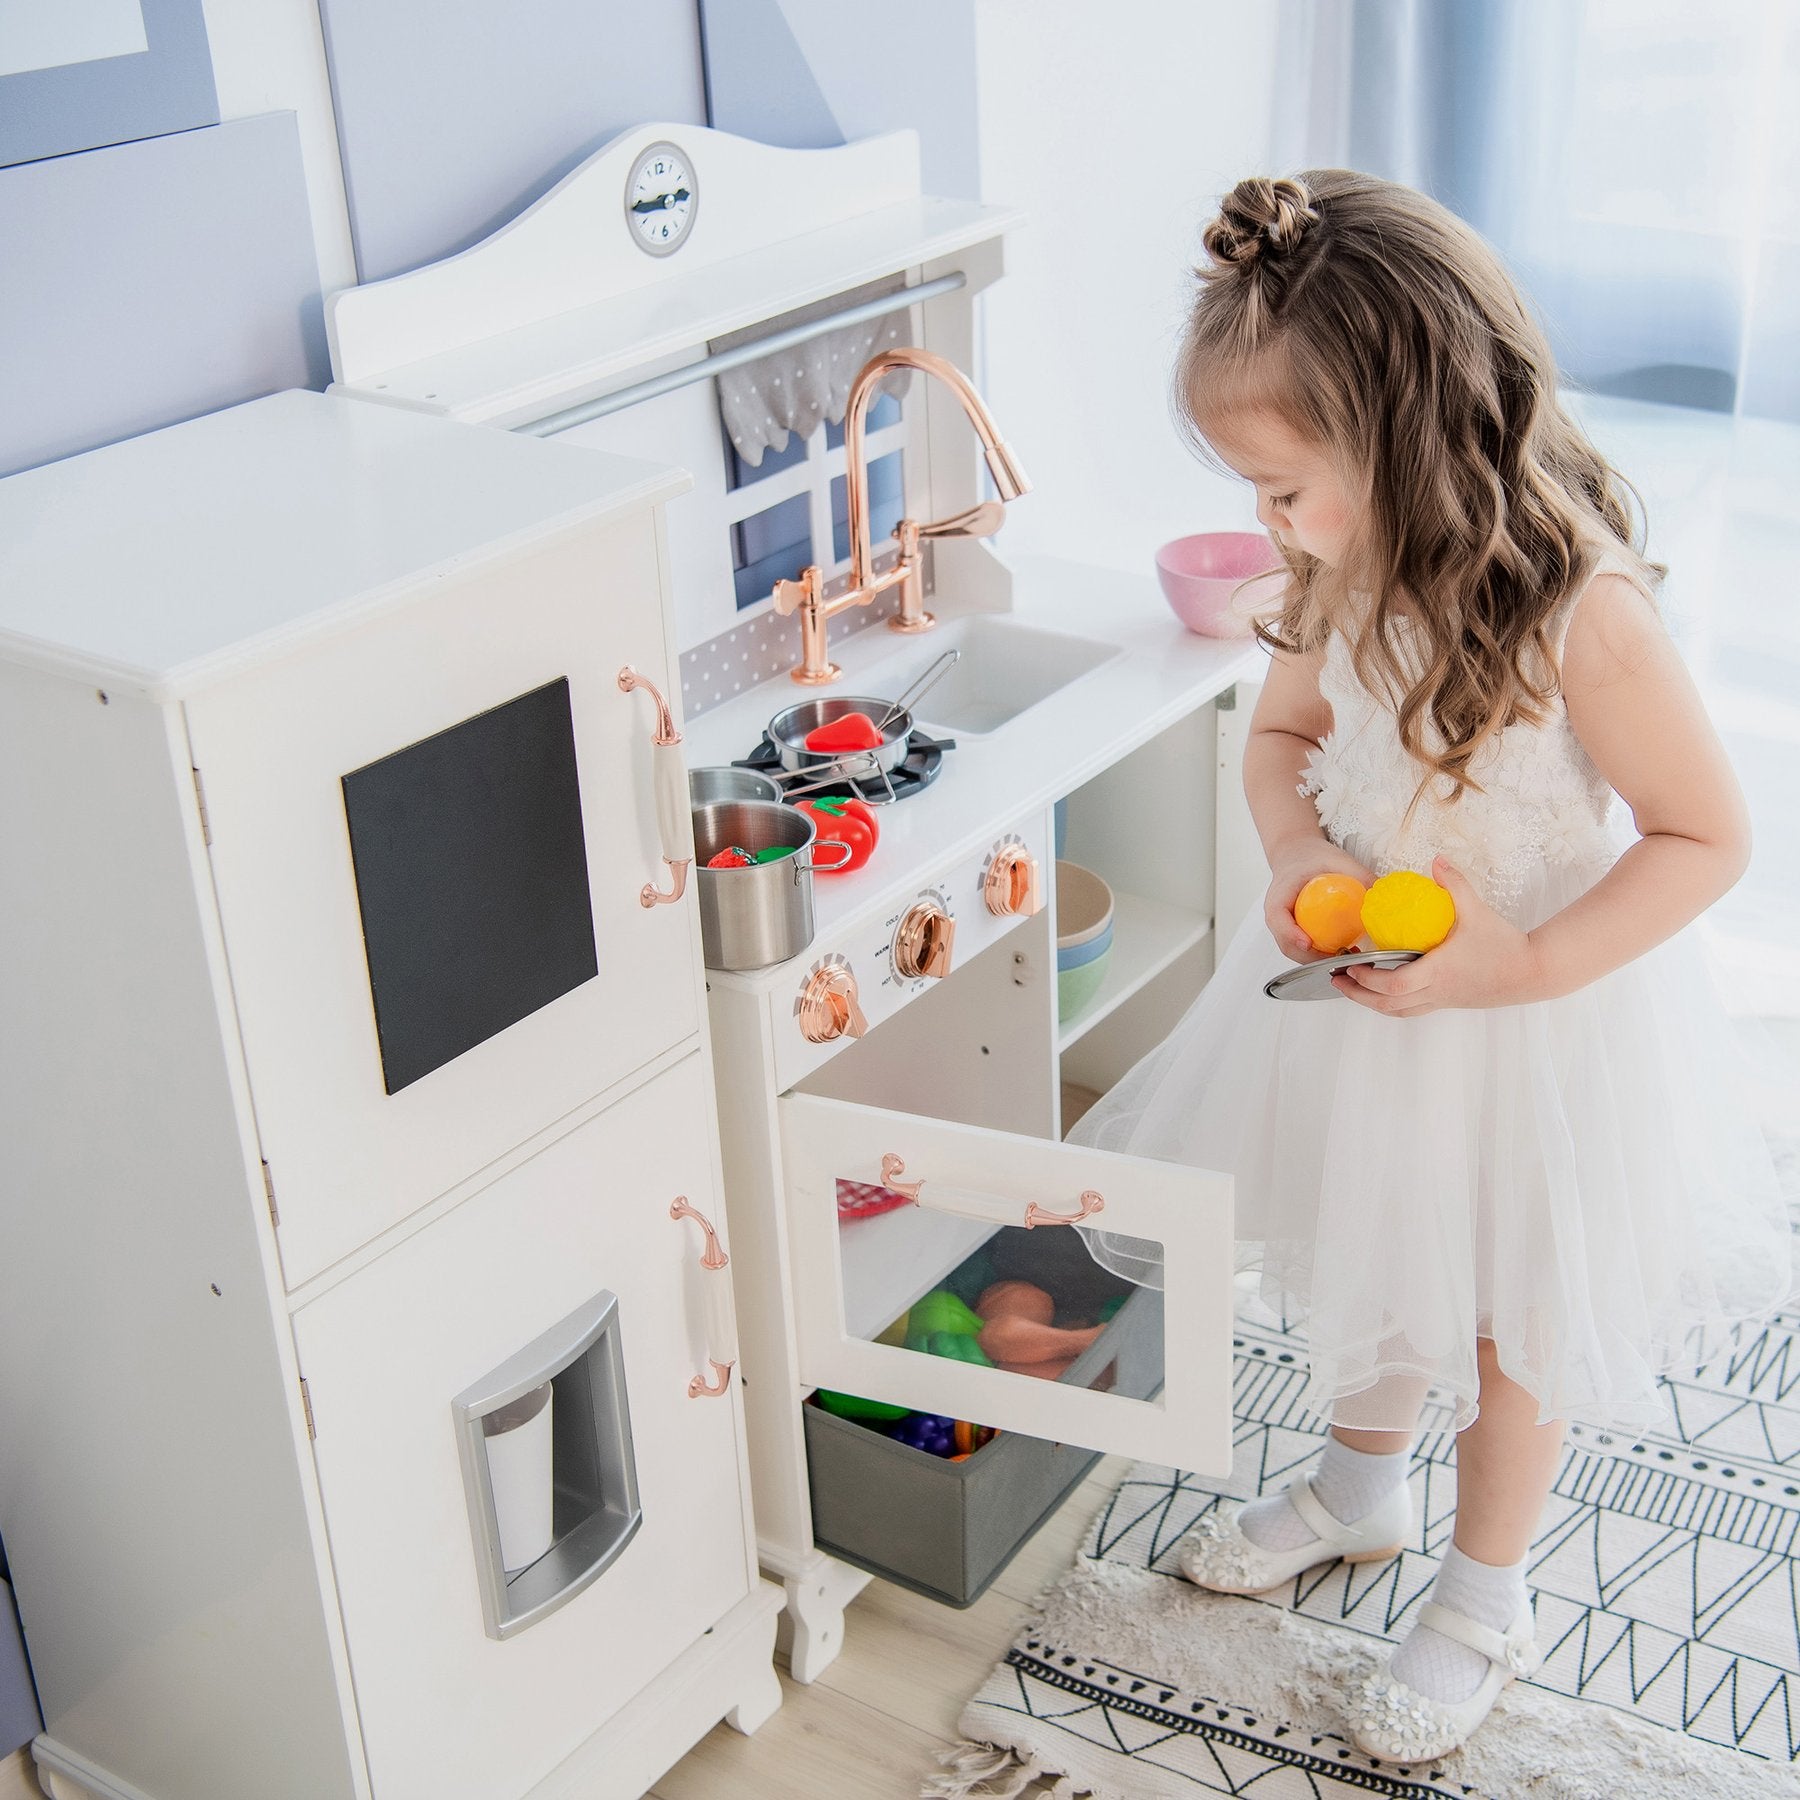 Kid playing with a white retro play kitchen.